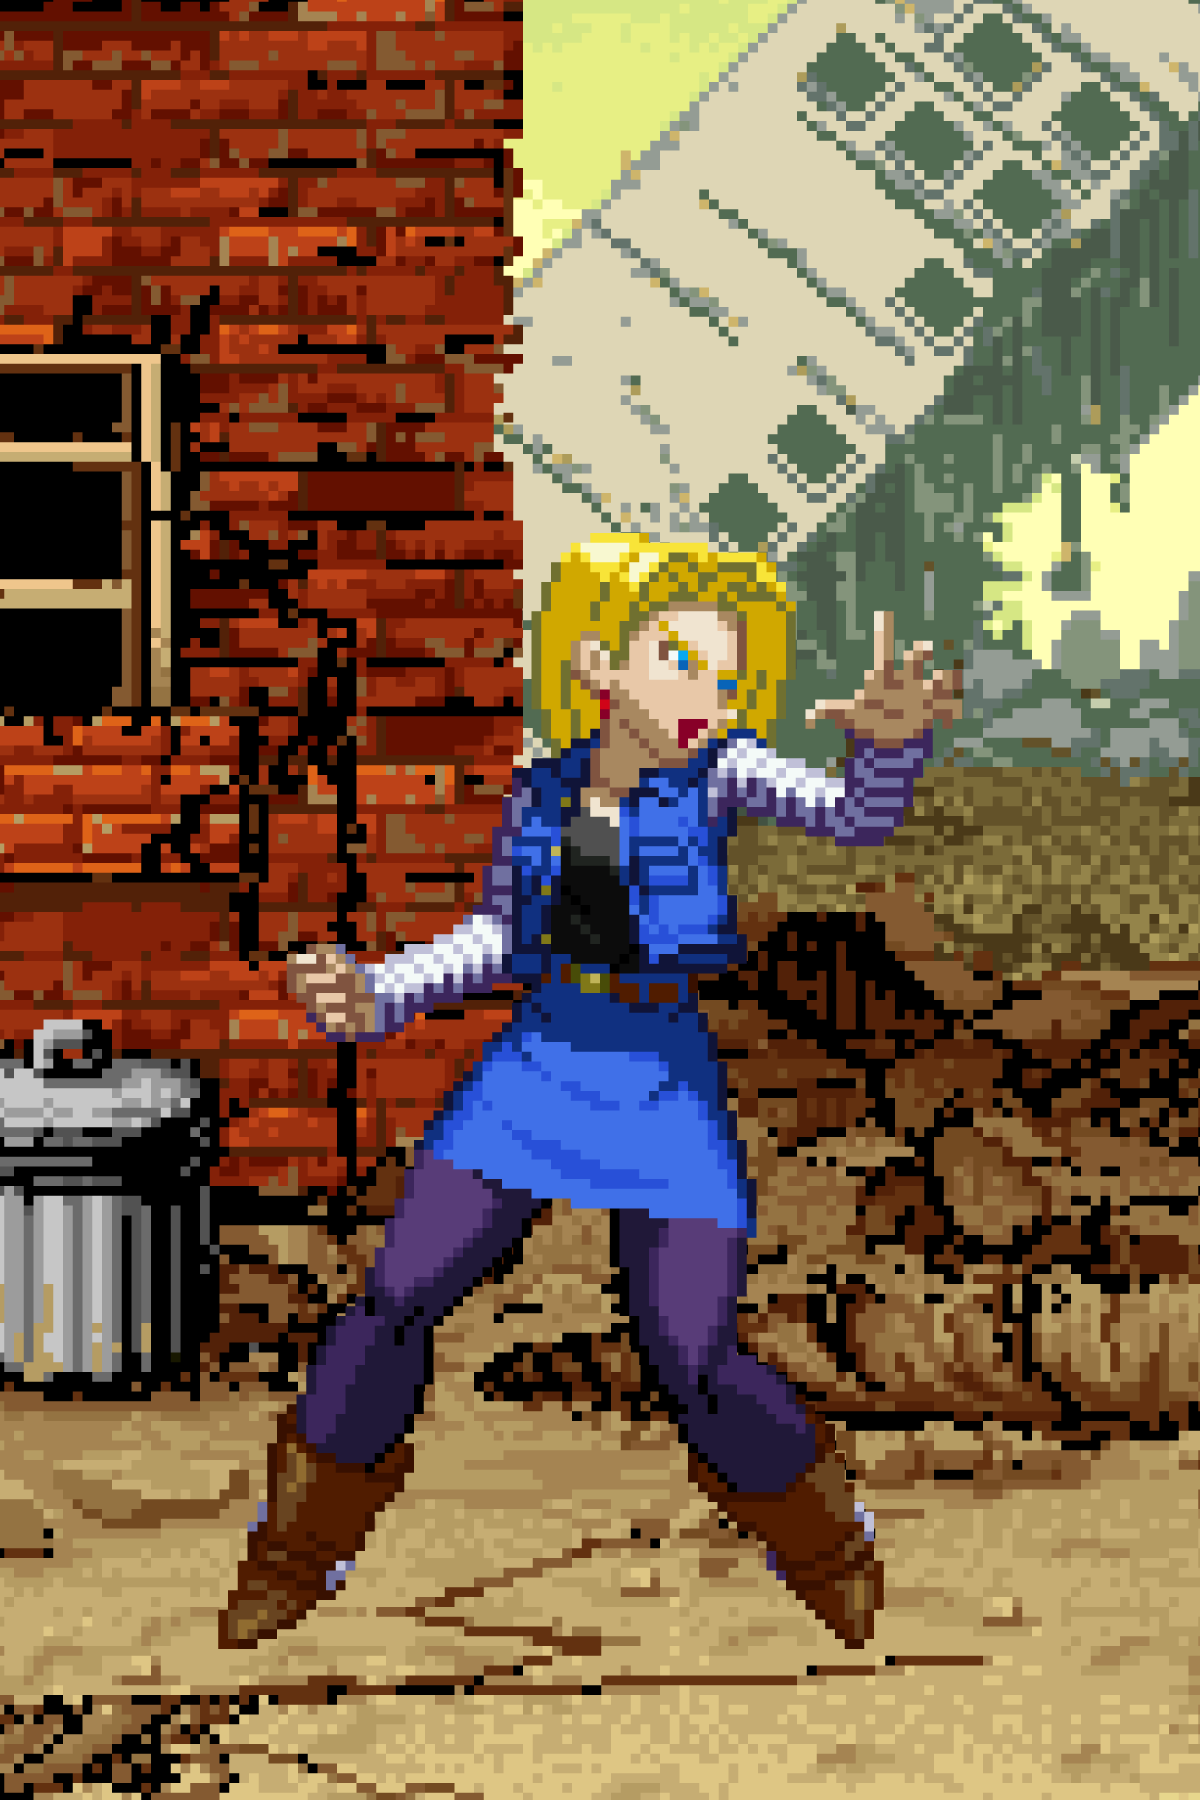 Android18 One Inch Punch - Pixel Vixen #119